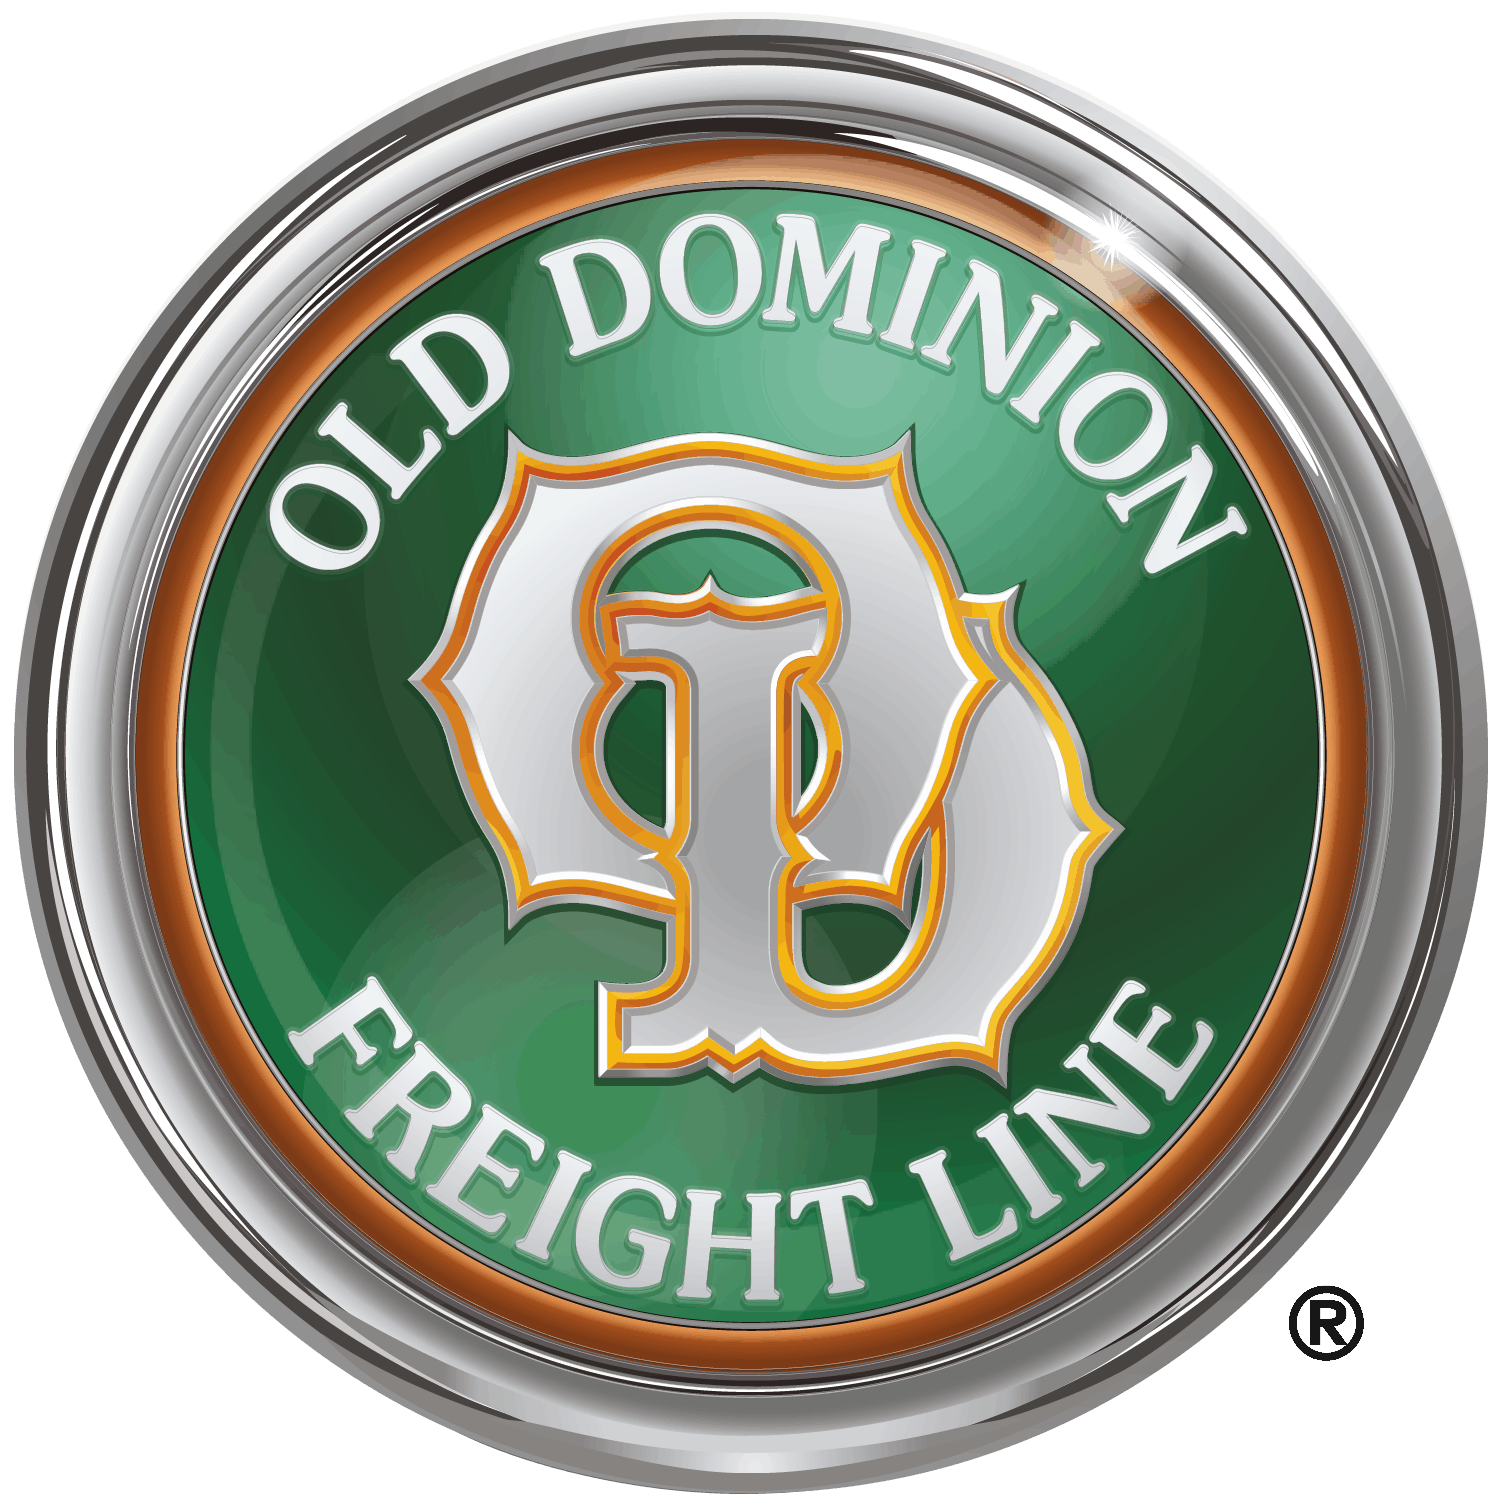 Old Dominion Freight Line Logo png